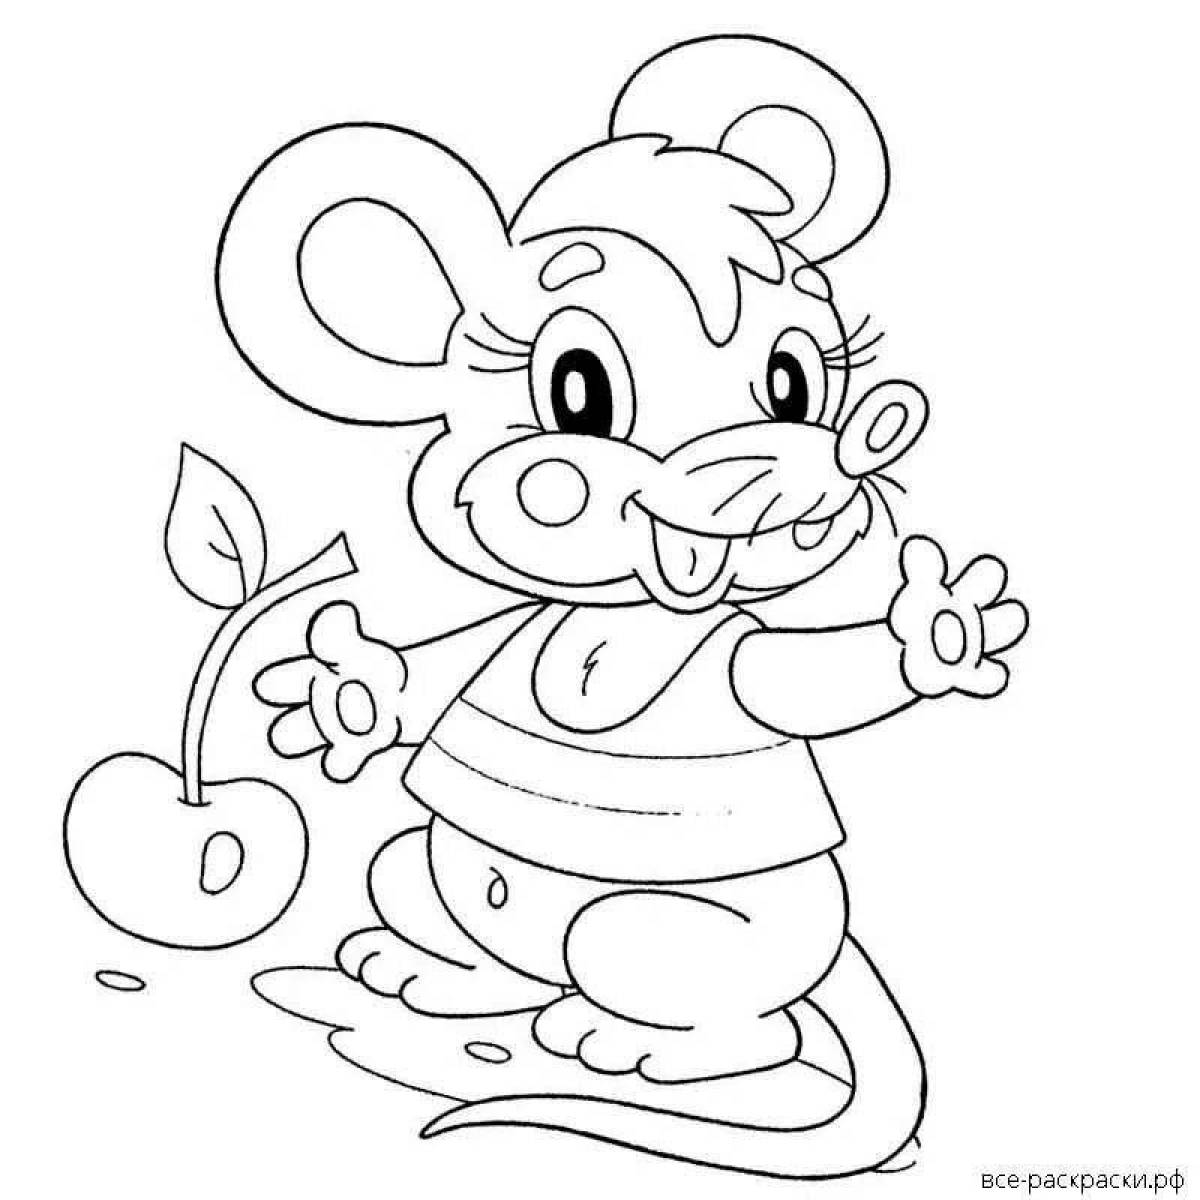 Color-happy mouse coloring page for 3-4 year olds